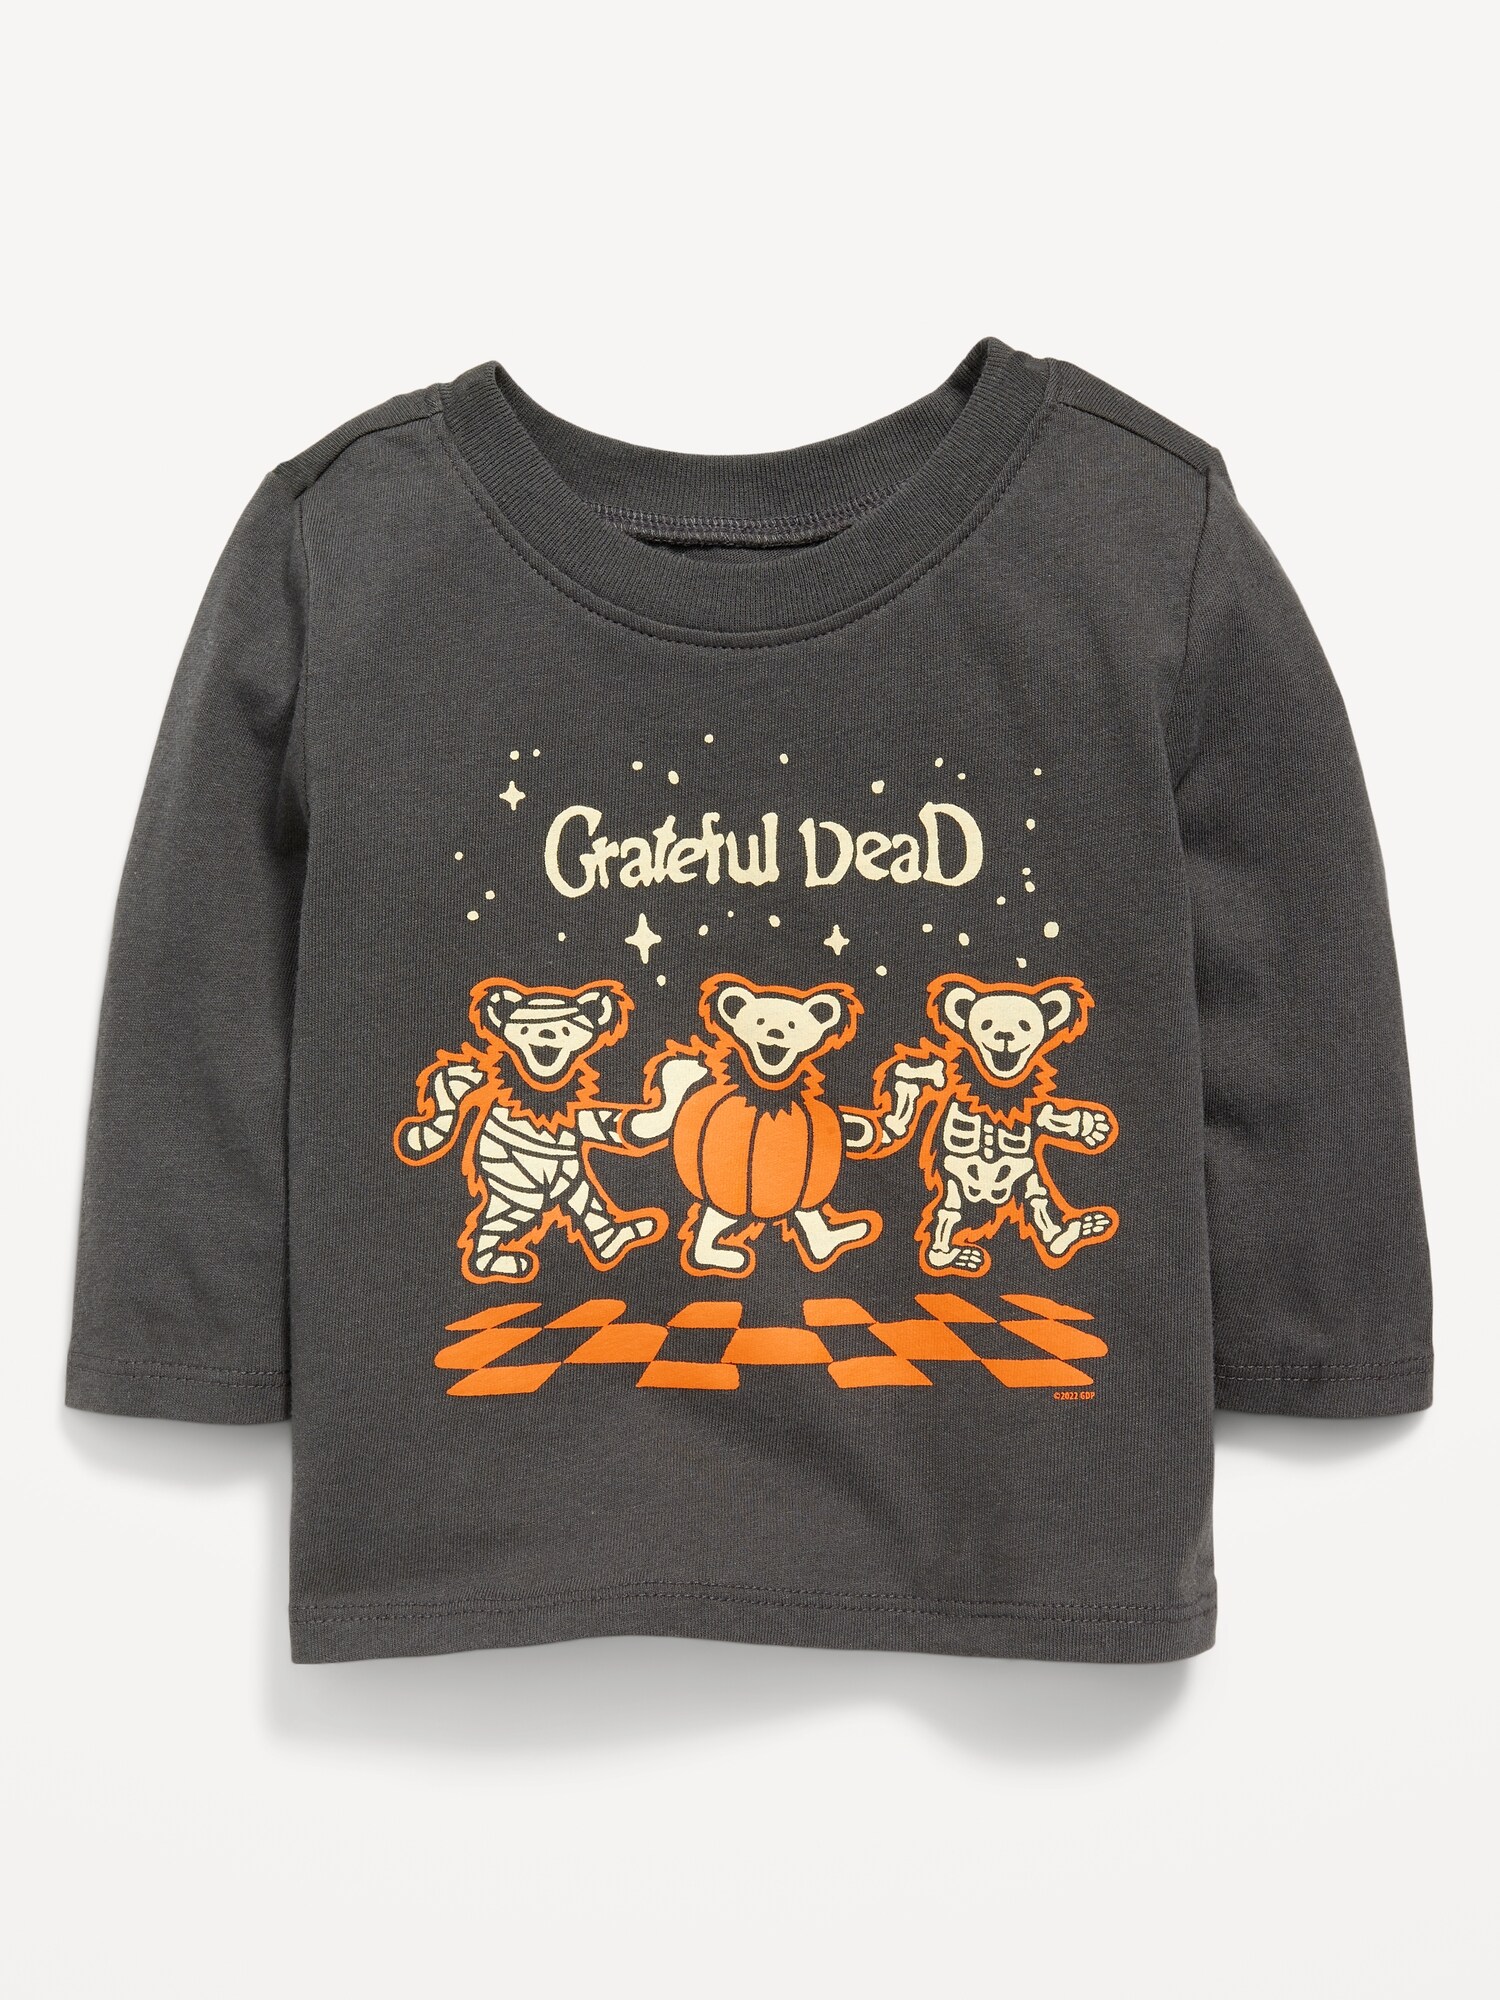 Unisex Matching Halloween Licensed Graphic T-Shirt for Baby | Old Navy